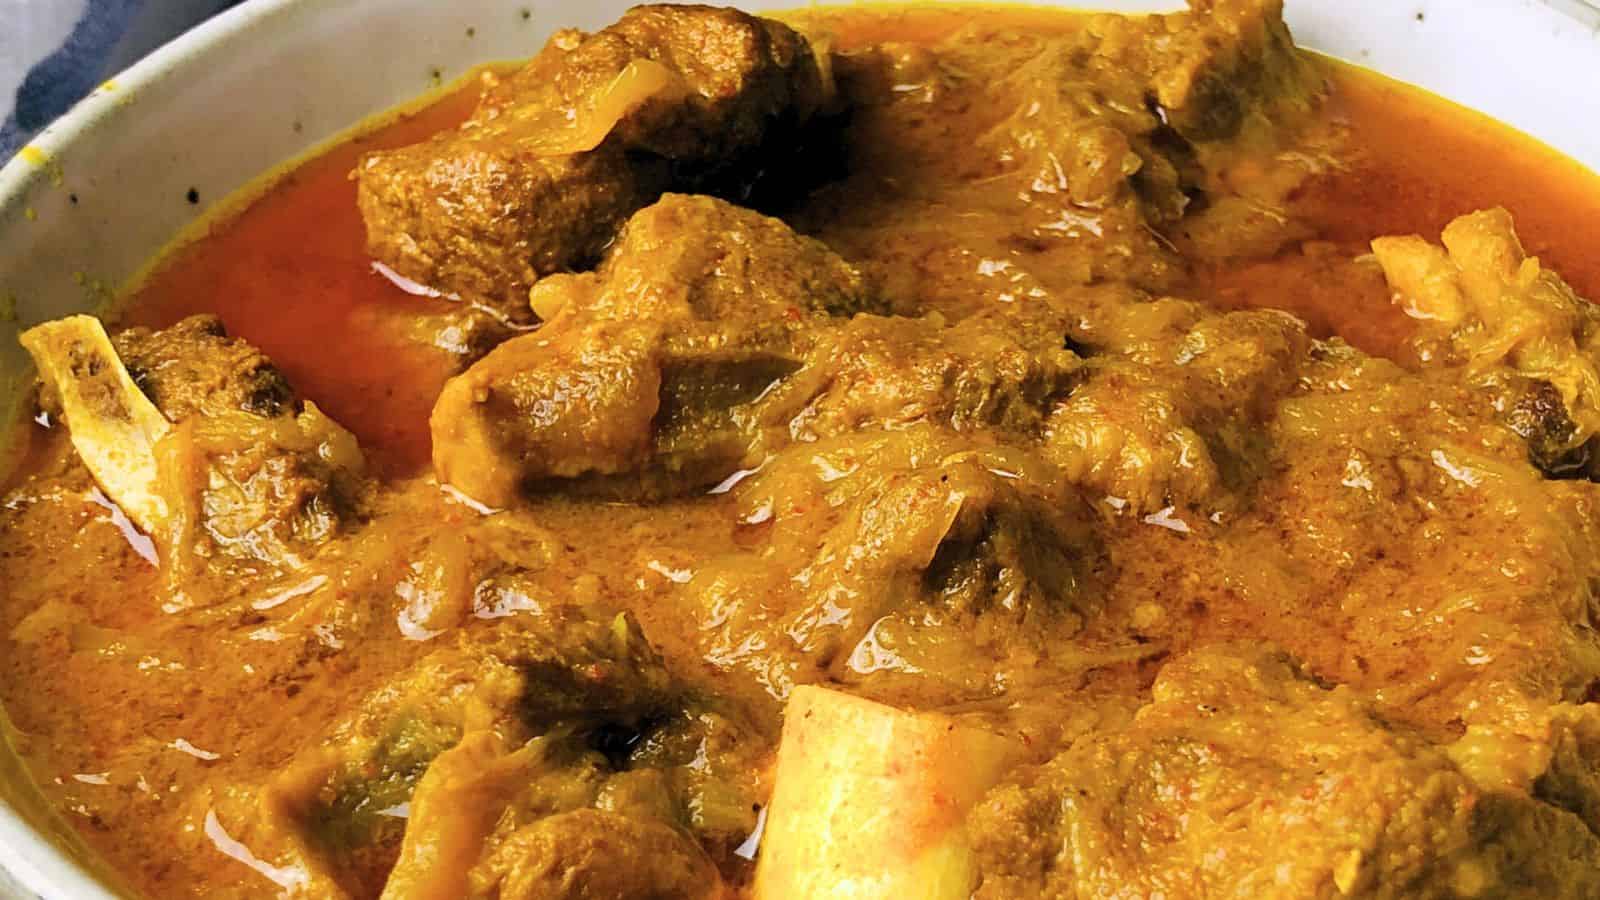 Bowl of Goat Curry with thick, rich gravy and chunks of meat on the bone.